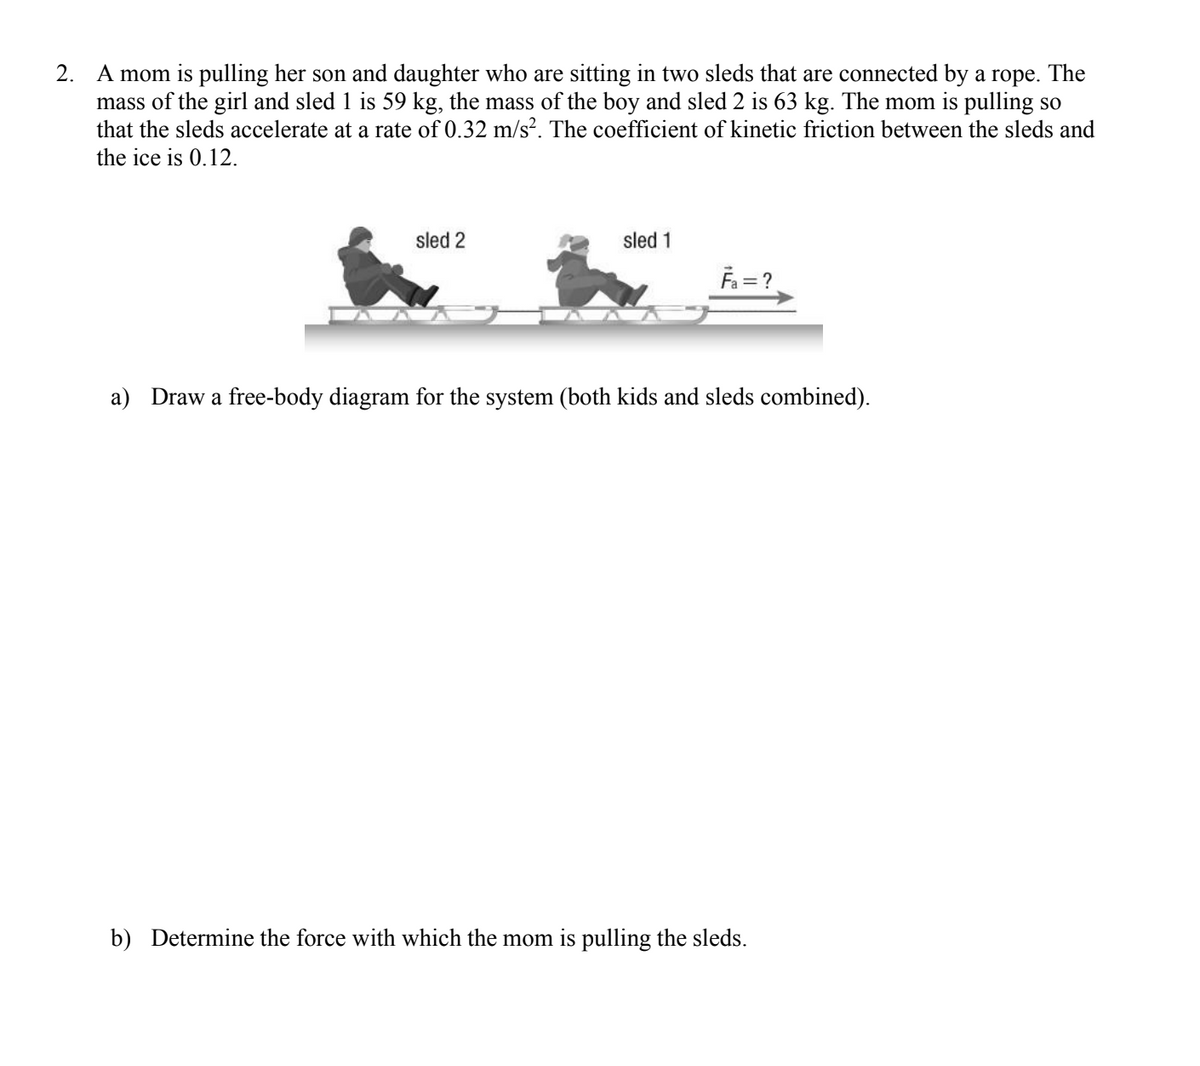 2.
A mom is pulling her son and daughter who are sitting in two sleds that are connected by a rope. The
mass of the girl and sled 1 is 59 kg, the mass of the boy and sled 2 is 63 kg. The mom is pulling so
that the sleds accelerate at a rate of 0.32 m/s². The coefficient of kinetic friction between the sleds and
the ice is 0.12.
sled 2
sled 1
F₁ = ?
a) Draw a free-body diagram for the system (both kids and sleds combined).
b) Determine the force with which the mom is pulling the sleds.